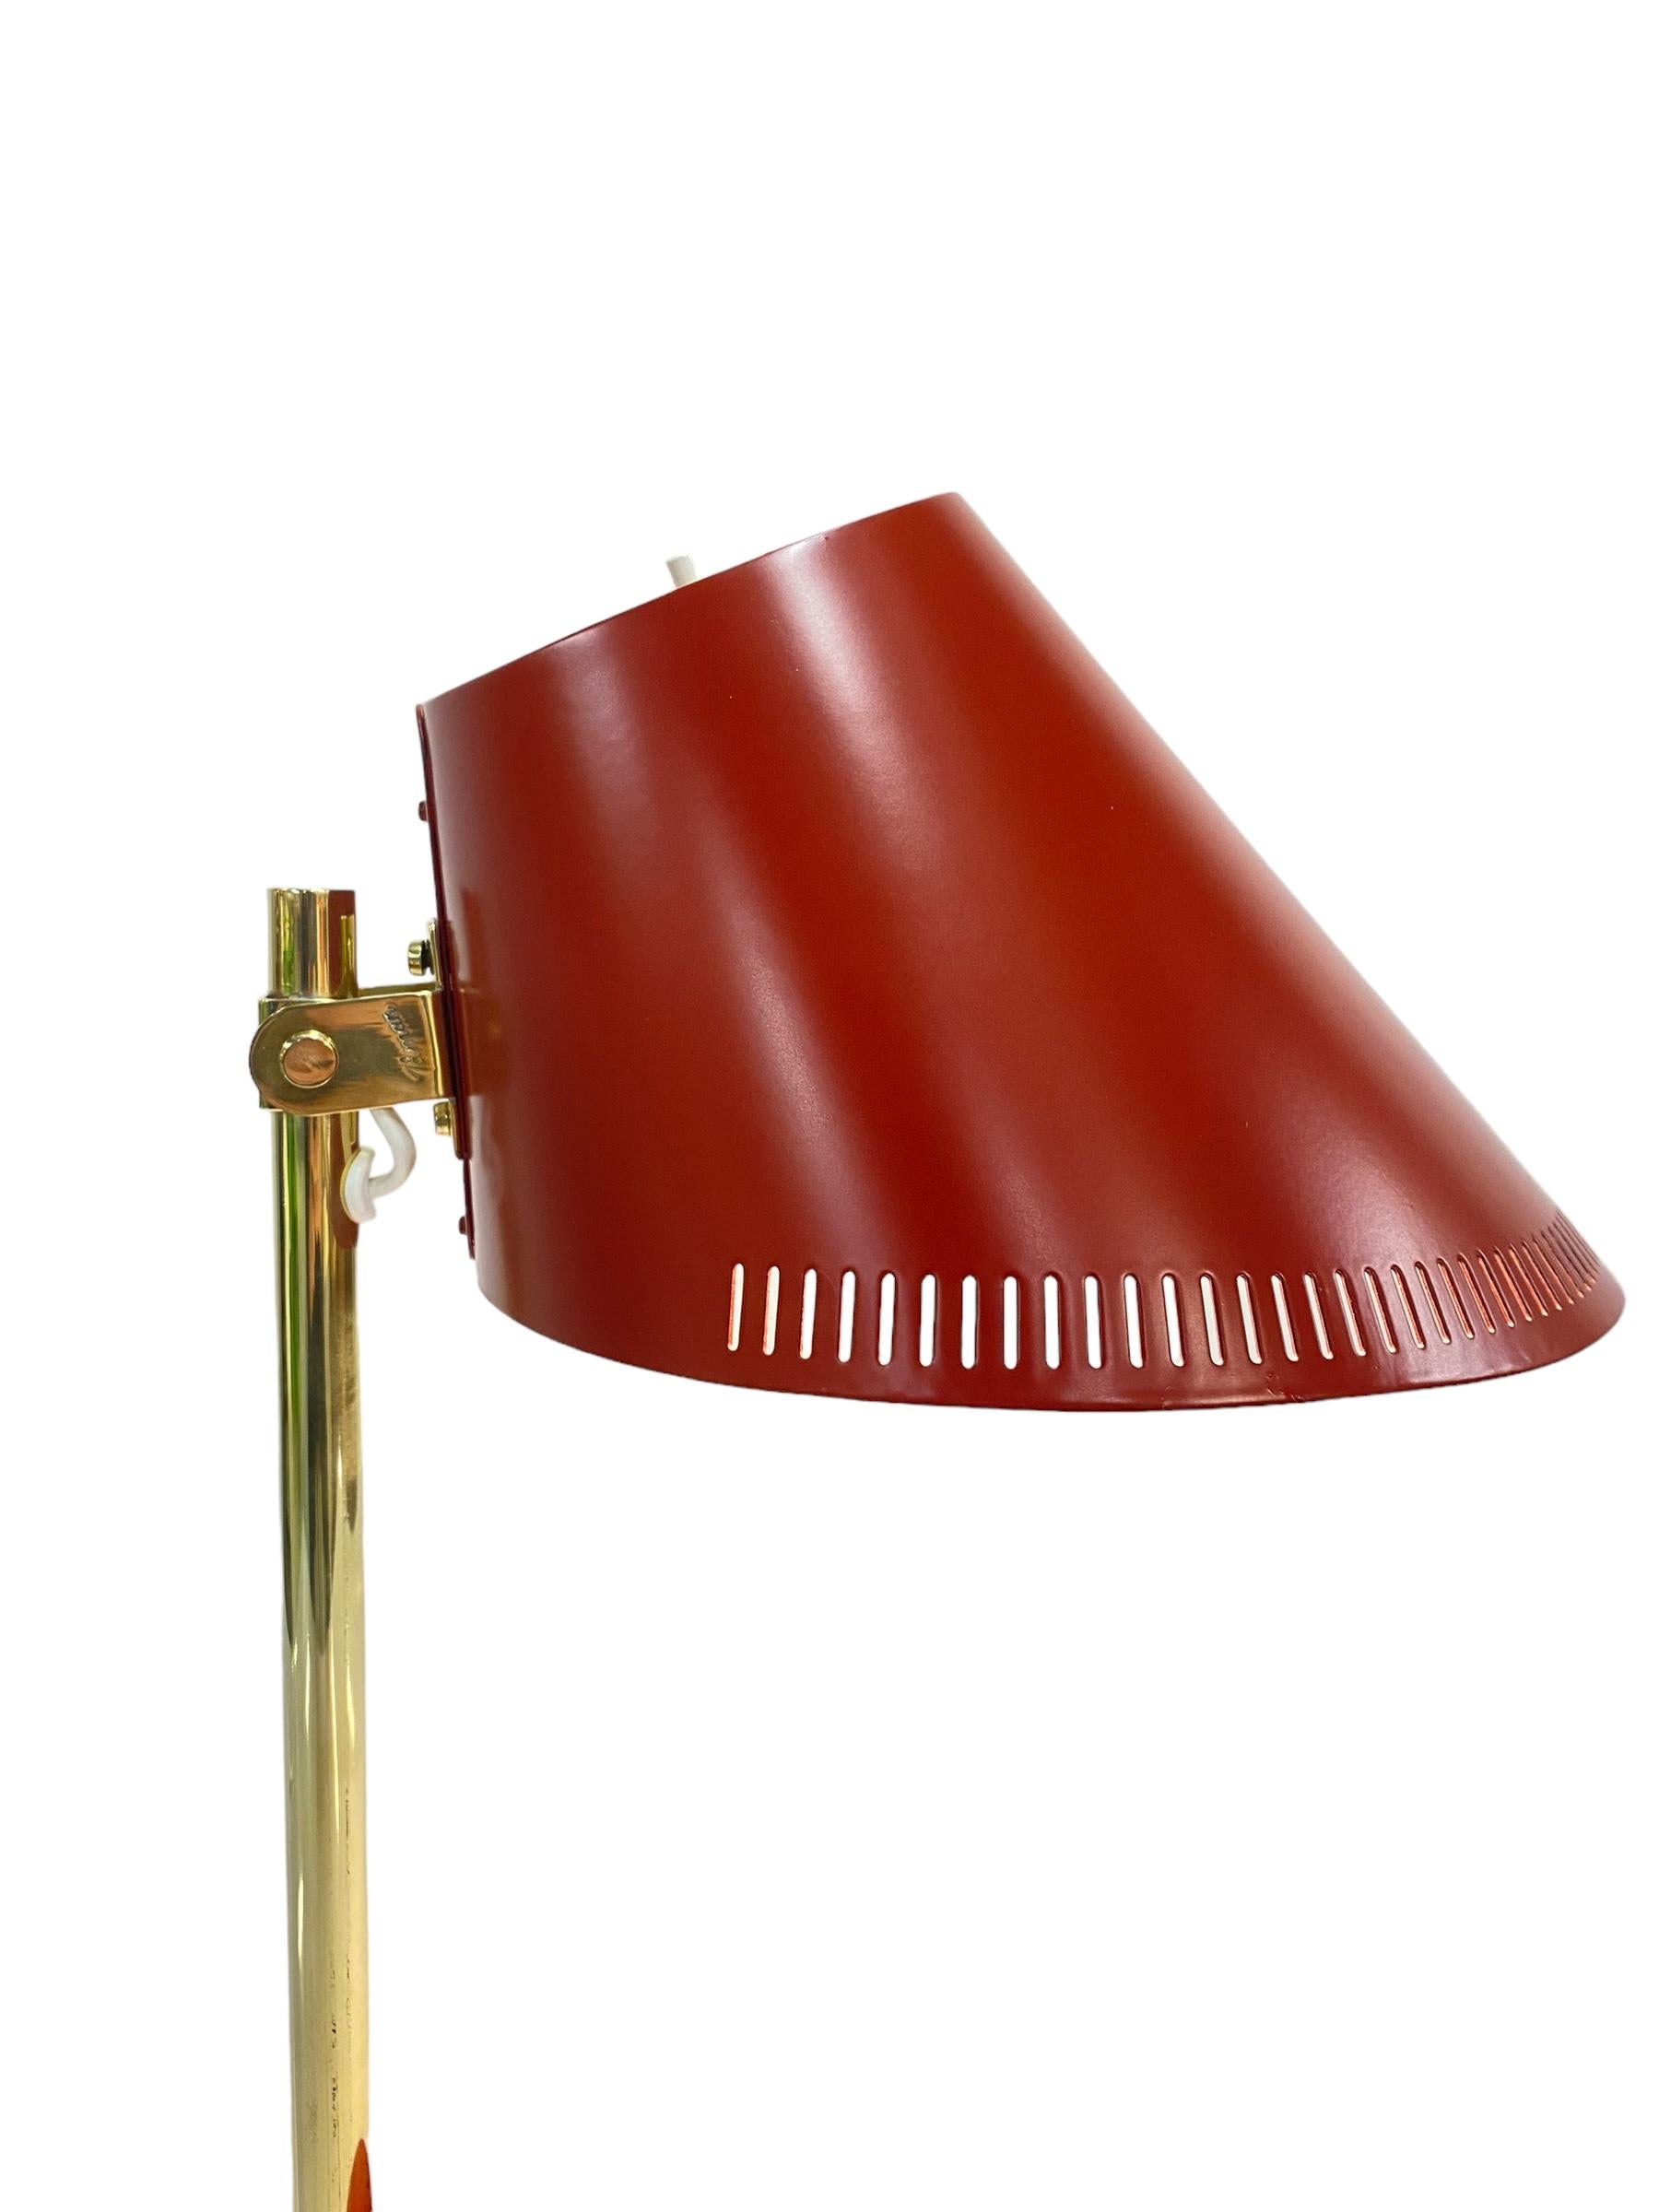 An exquisite example of a beautiful classic design with features that makes it suitable for a wide range of spaces especially offices, home offices or reading and working tables. 
This 9227 model table lamp has proven to be a customers favorite over